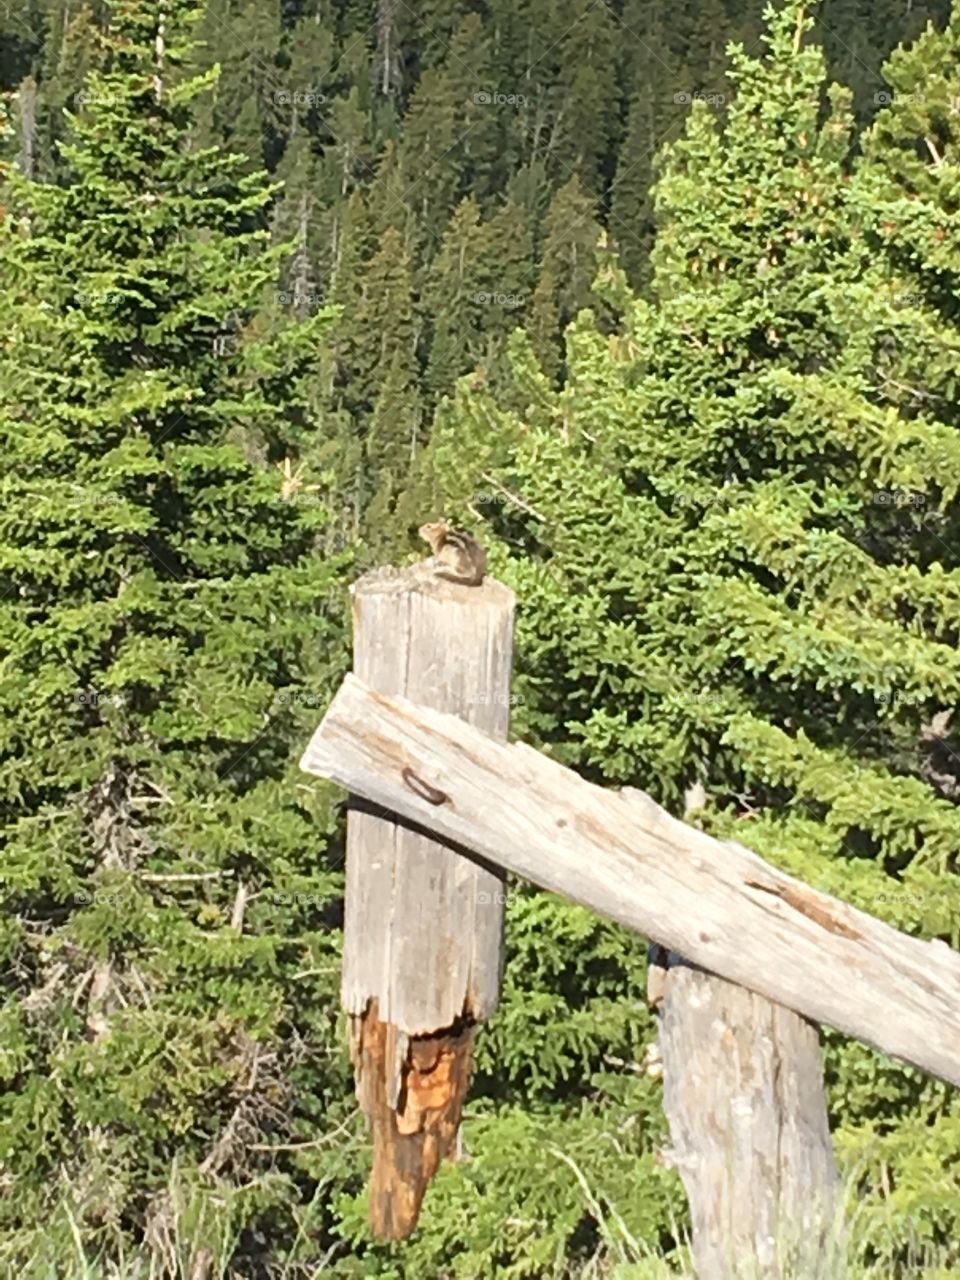 Lone chipmunk resting on an extended piece of fence post